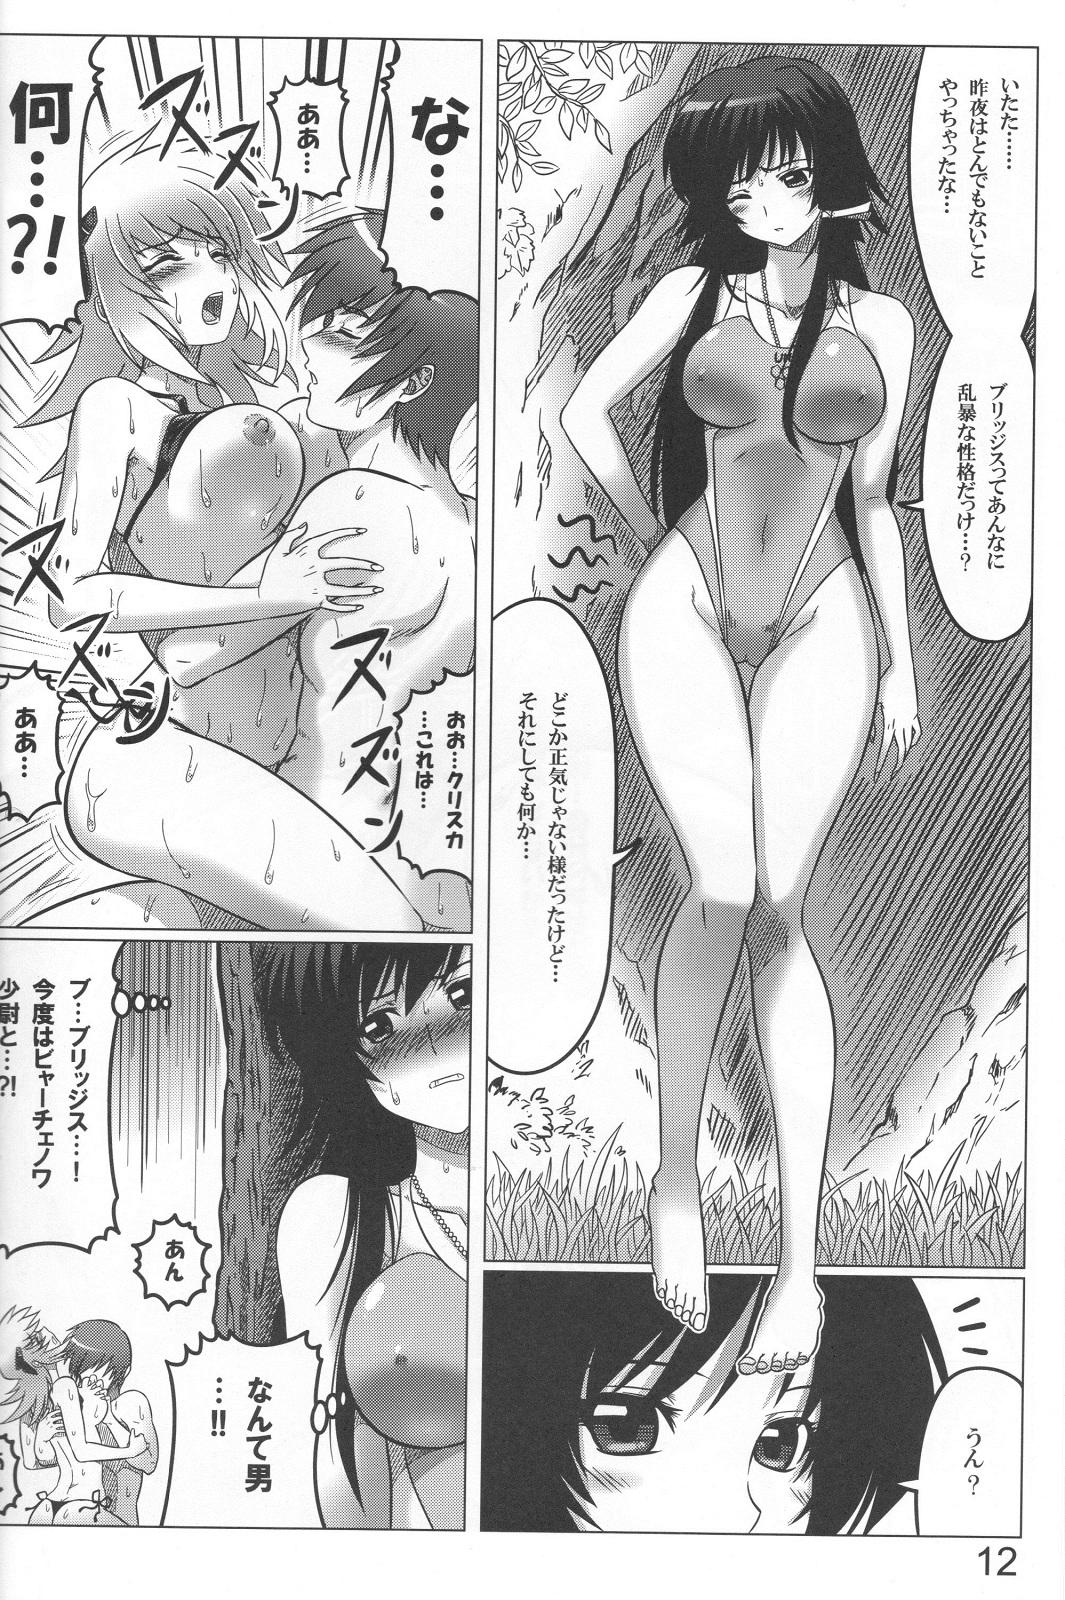 Couple Intermission H - Muv-luv alternative total eclipse Hairy Sexy - Page 12